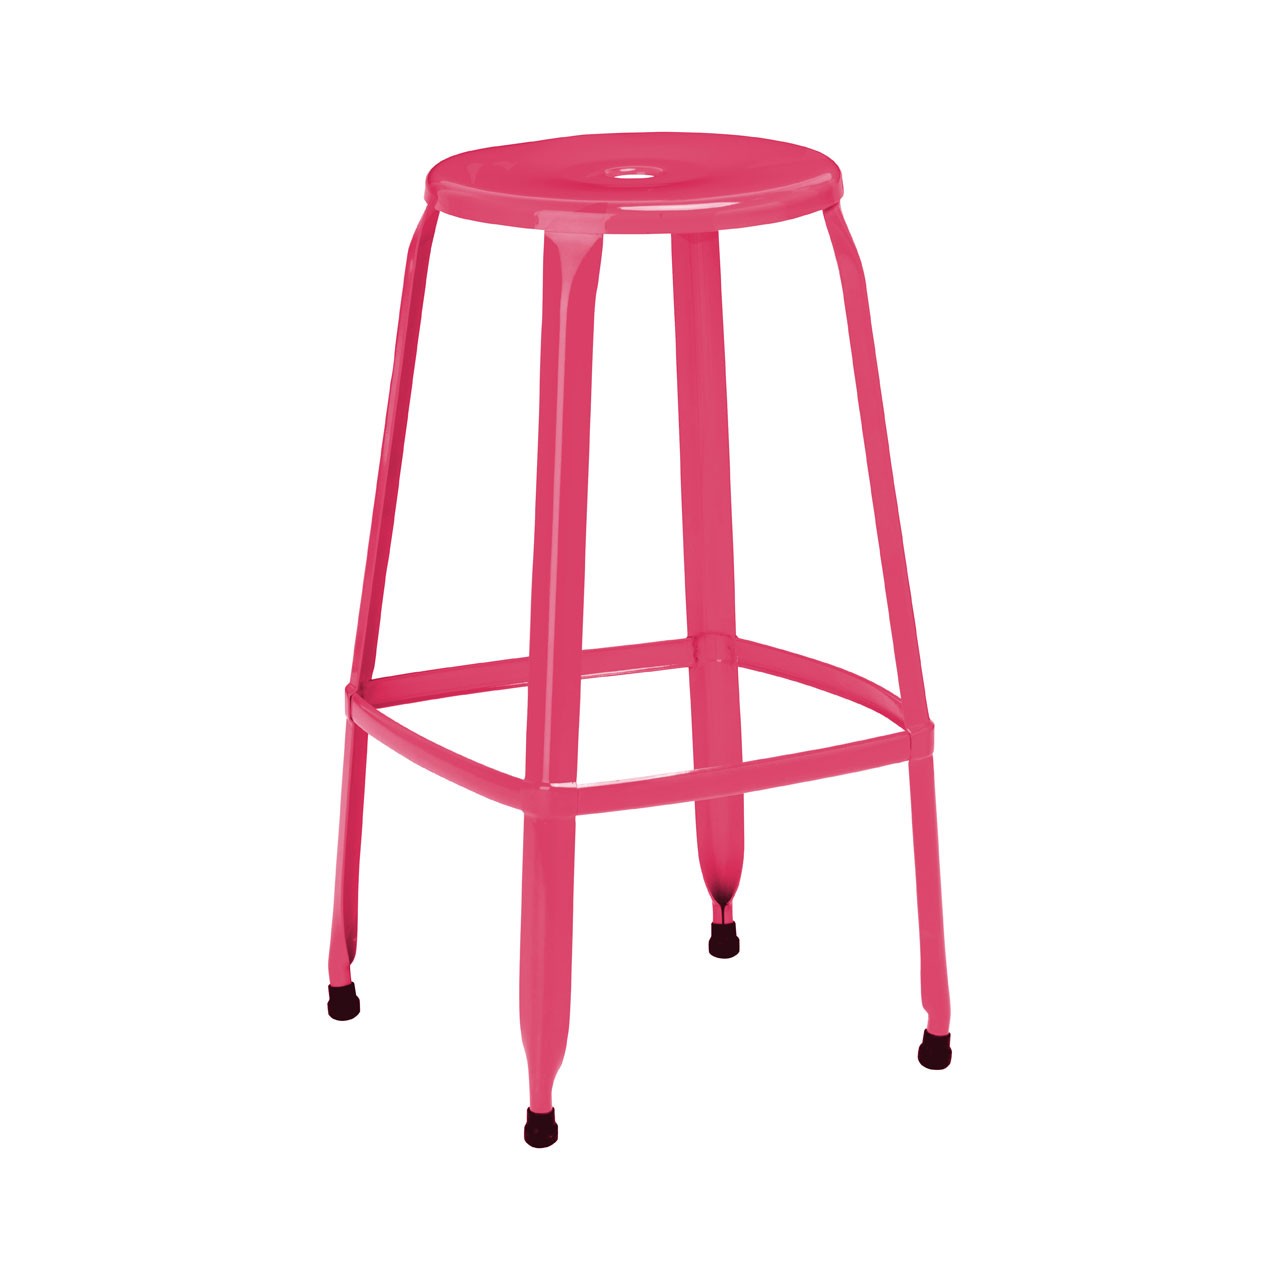 Kitchen Bar Disc Stool Powder Coated Metal For Home Office Break